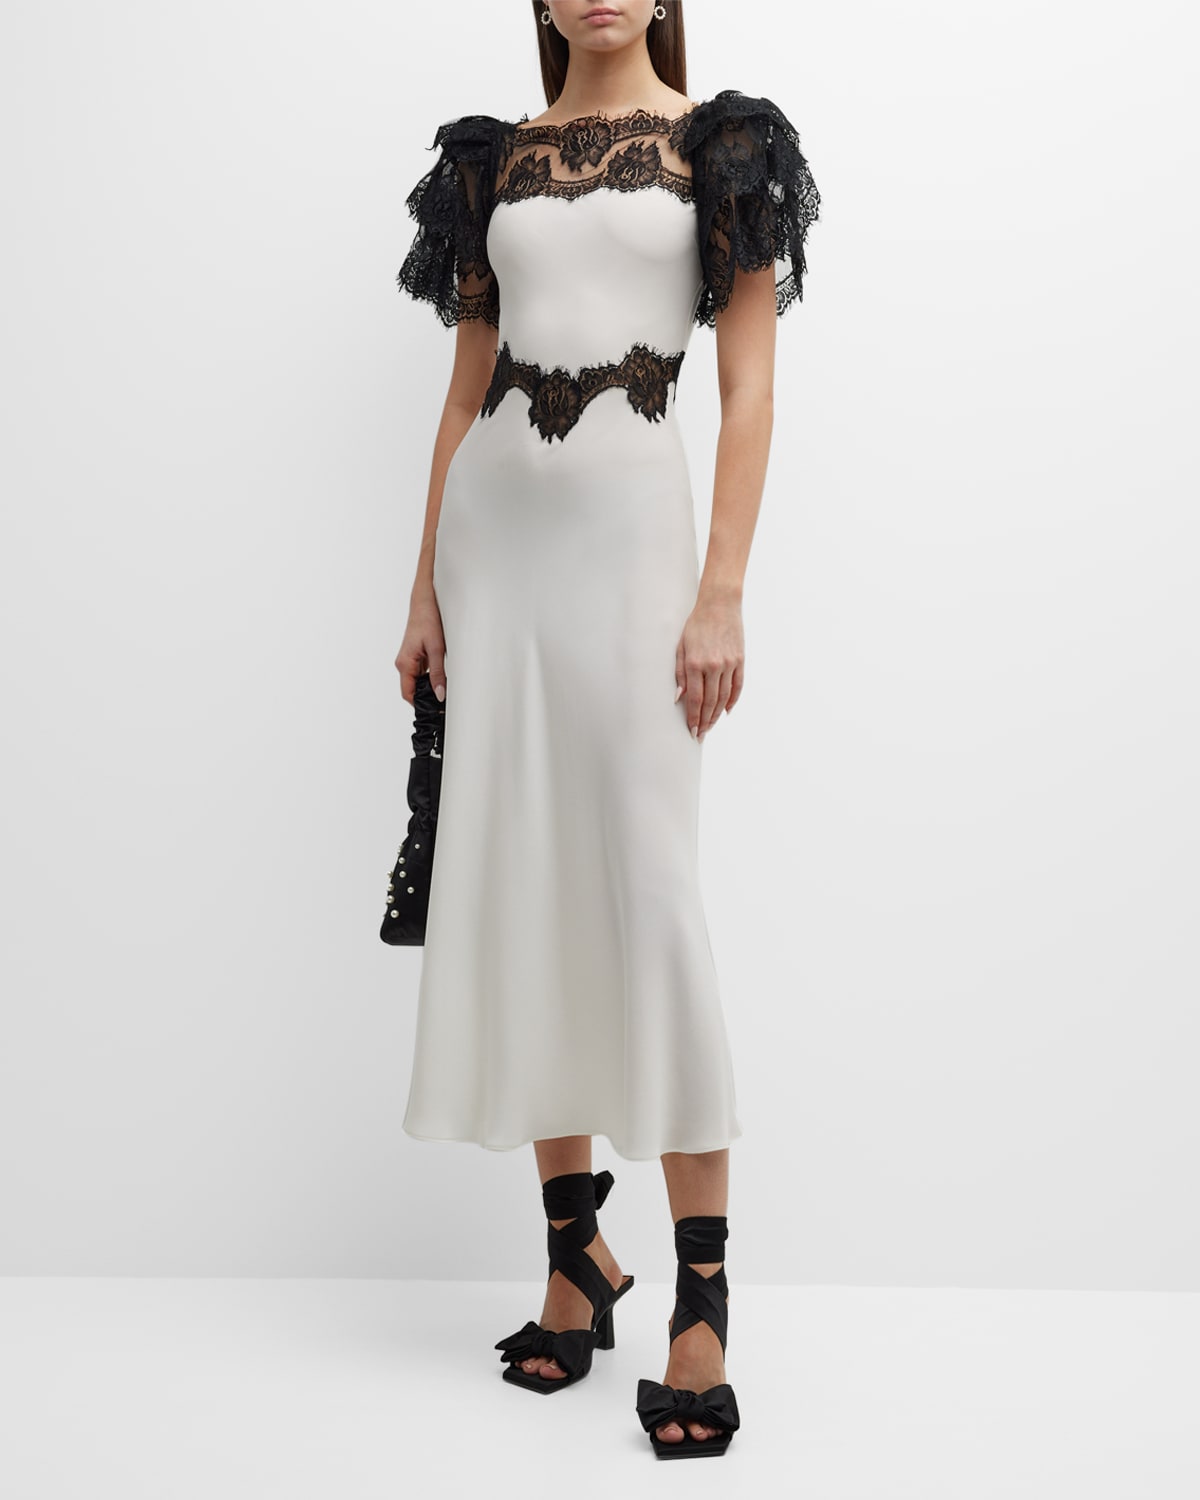 Silk Crepe Dress With Black Rose Lace Details